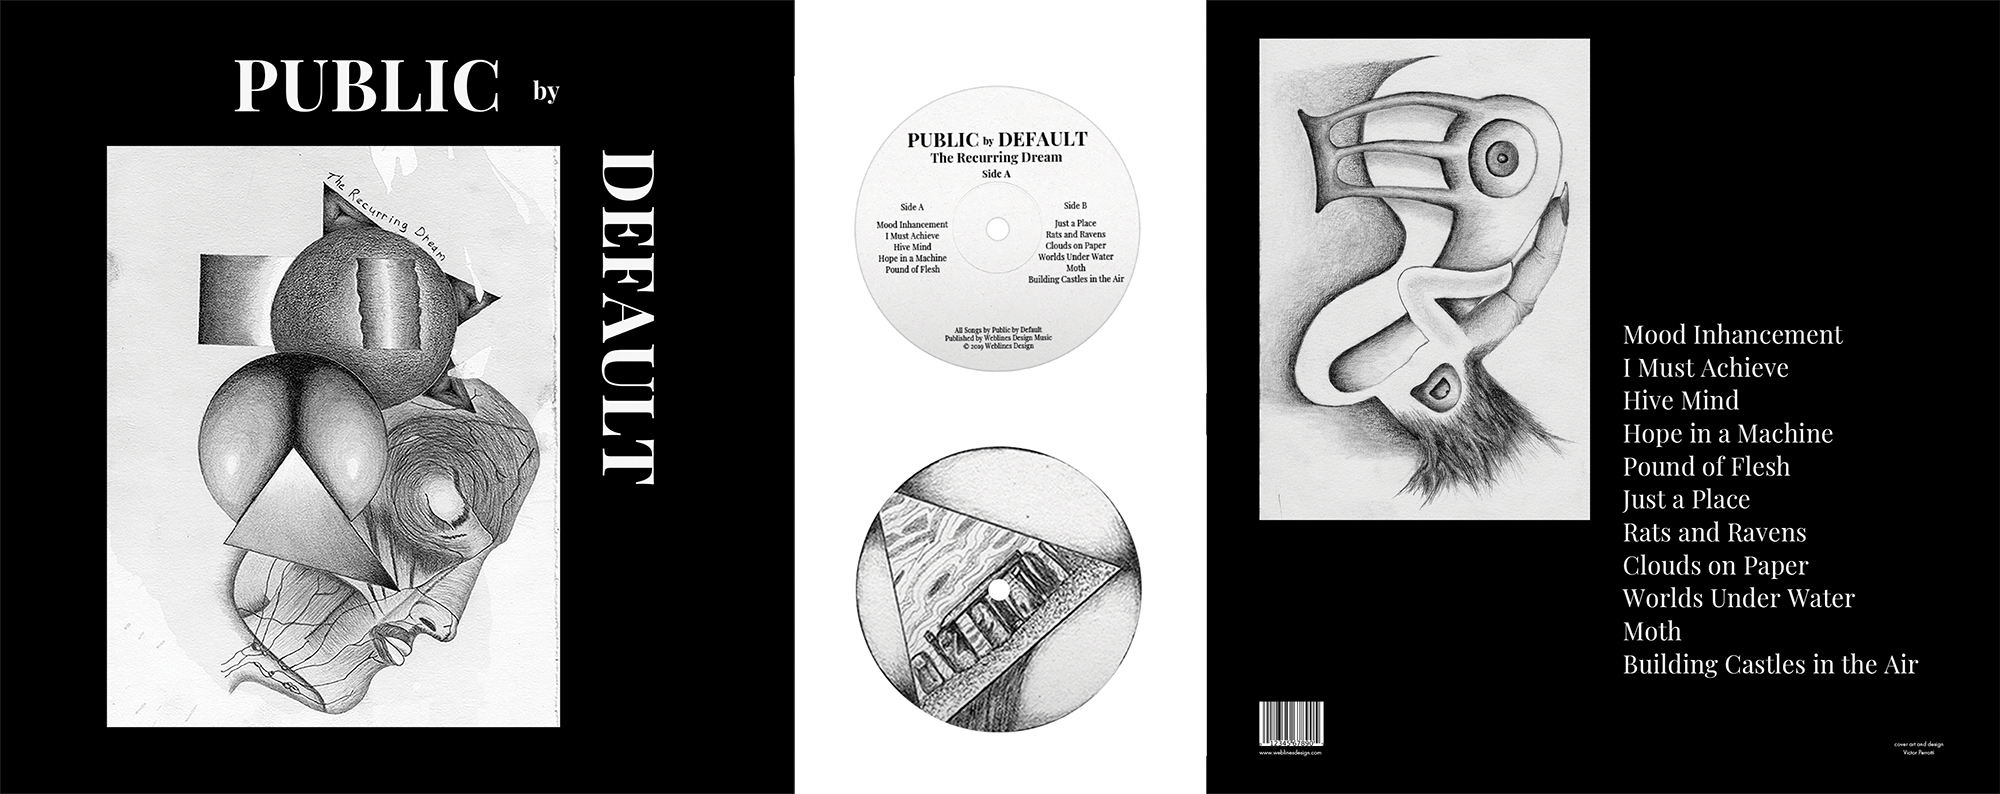 Public by Defauld Record Cover